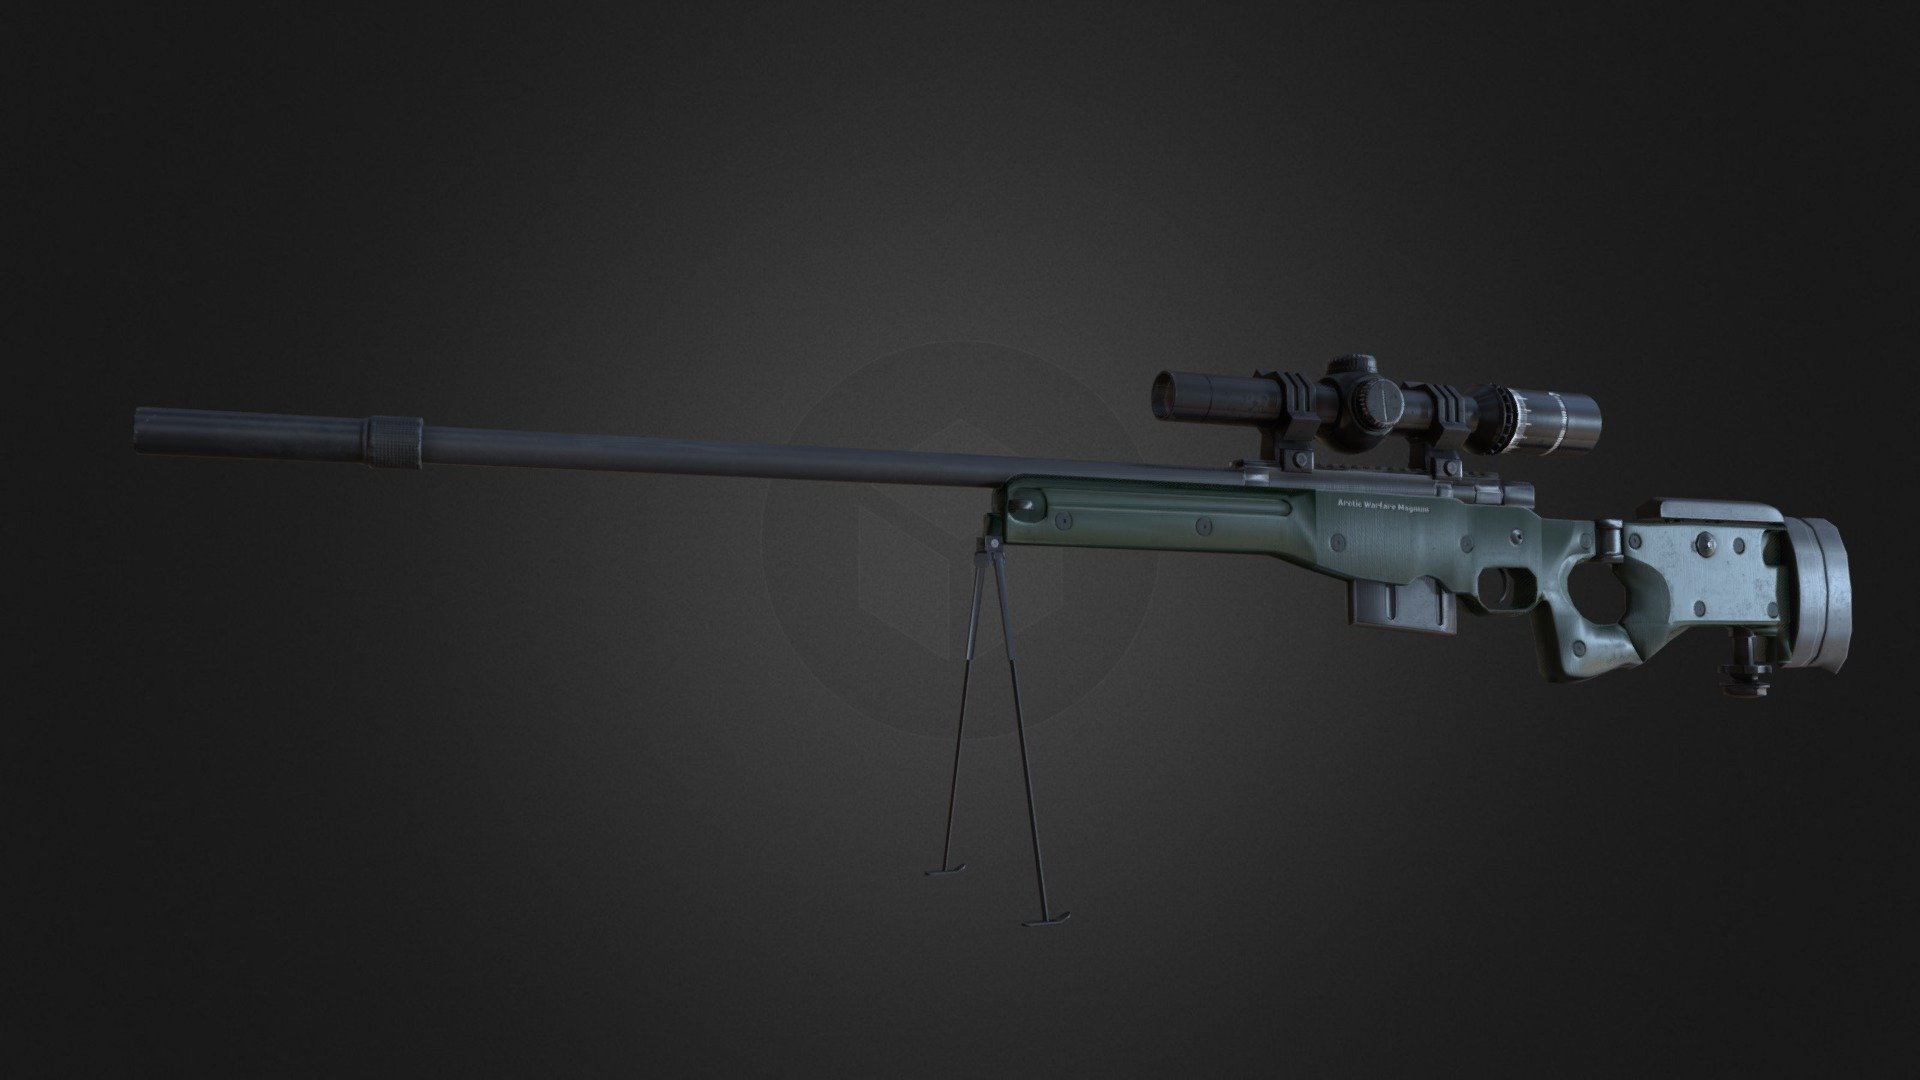 AWM Sniper Gun with 8X Scope and Suppressor

Model Details
Design in Maya18
Texture in Substance , photoshop
Maps - Base color map, Metallic map, Roughness map, Normal map, - AWM Sniper lowpoly Gun with 8X Scope, Suppressor - 3D model by Magicalorbs (@orbsmagic) 3d model